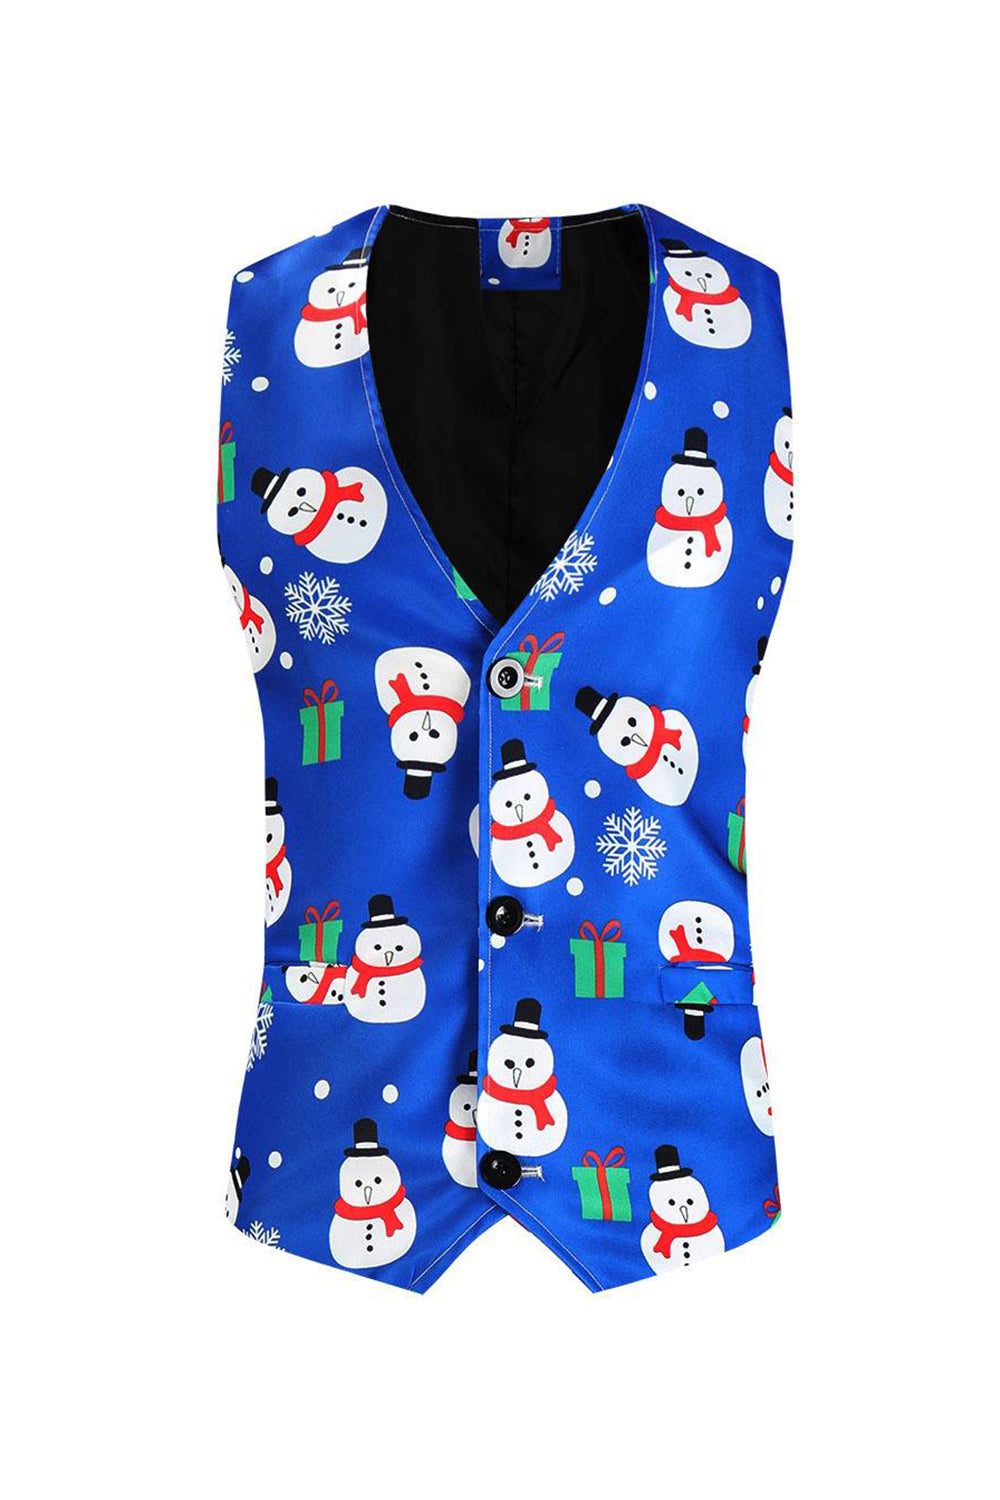 Blue Snowman Printed Single Breasted Sleeveless Men's Christmas Suit Vest